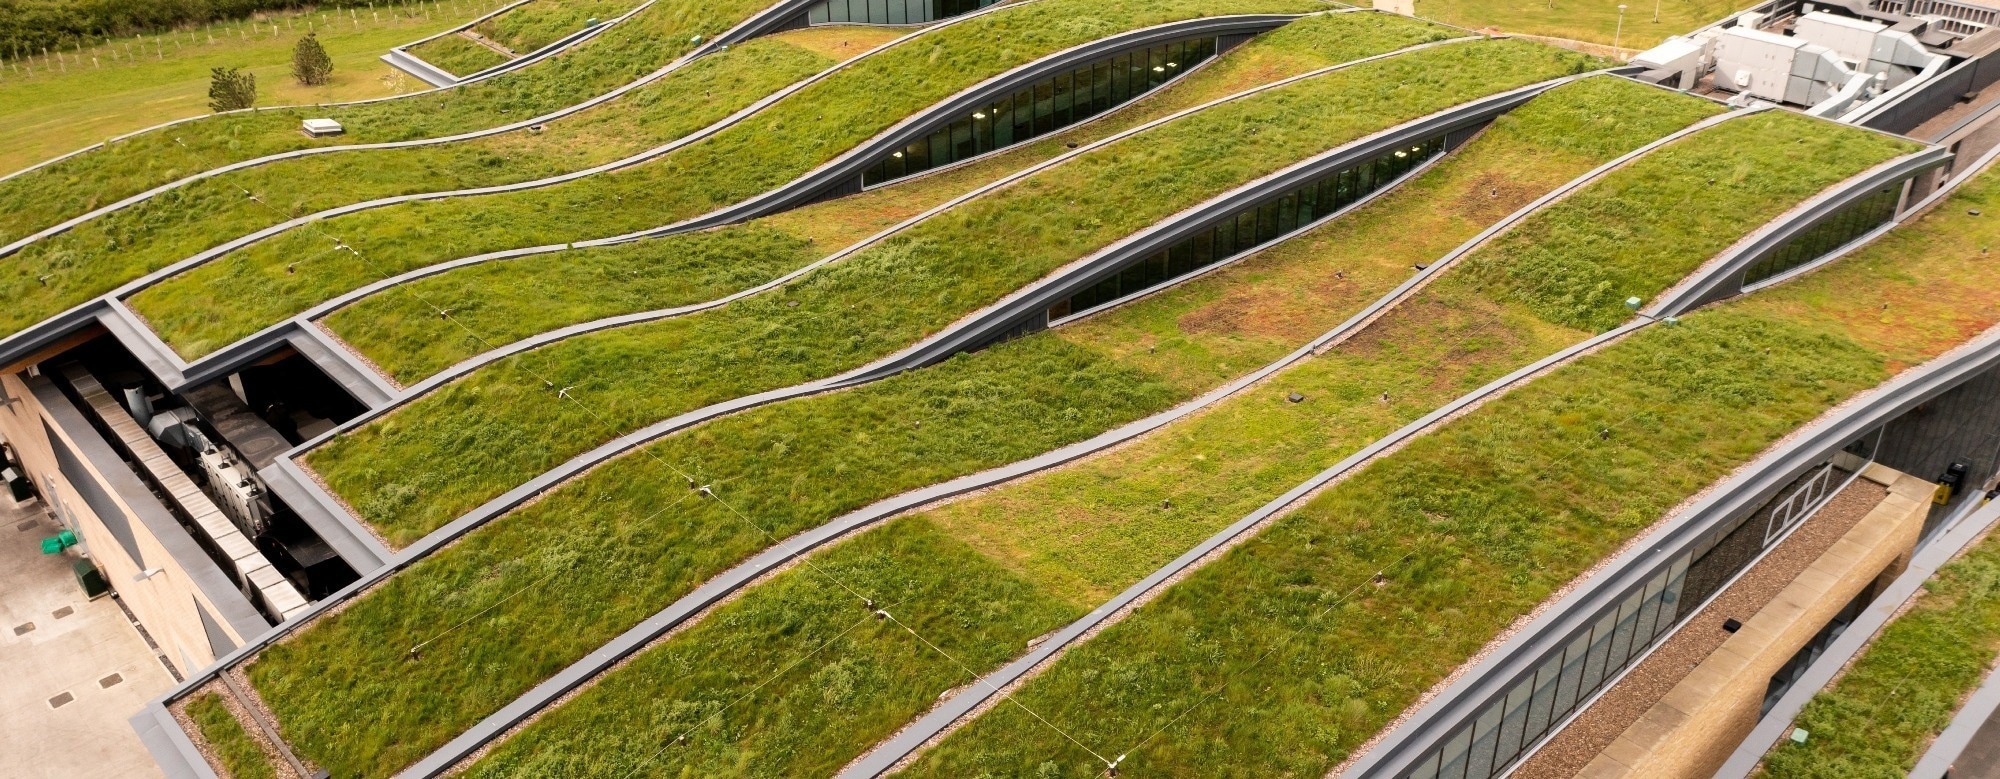 Emerging Trends in Green Roofing Materials